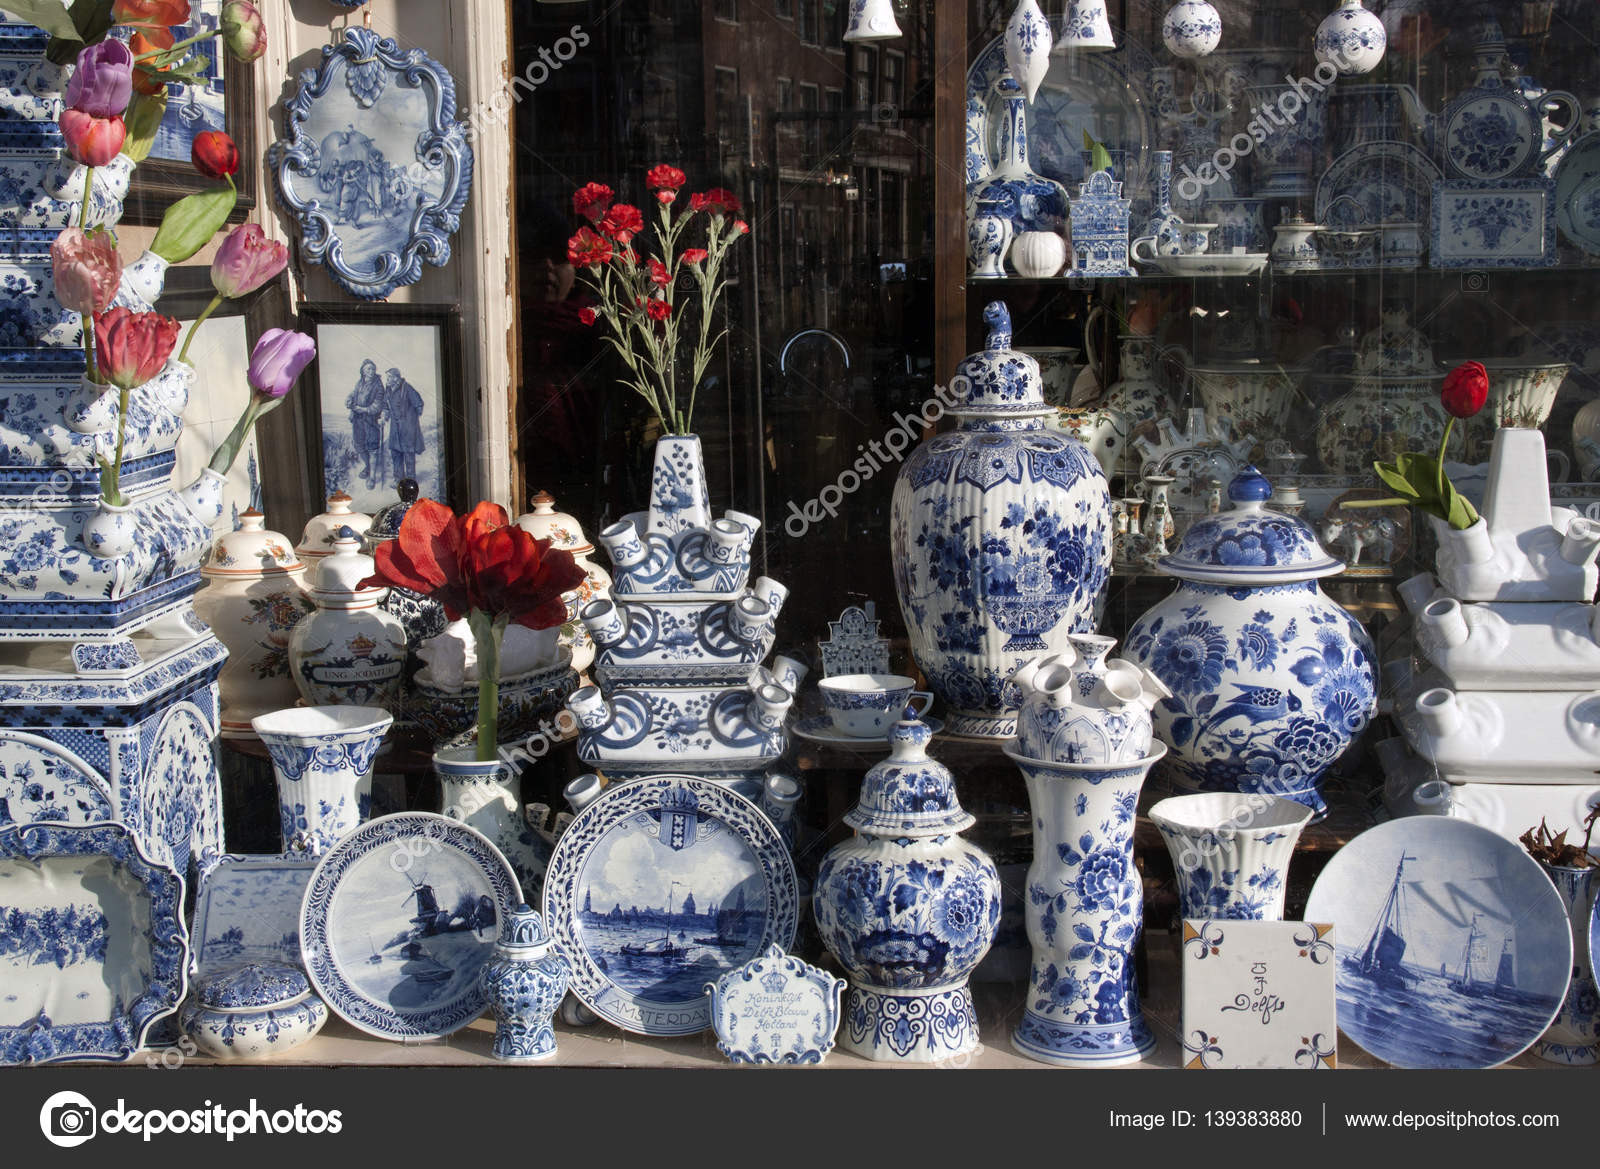 26 attractive Delft Blue Holland Vase 2024 free download delft blue holland vase of sklep z z delft w amsterdam zdjac299cie stockowe editorial throughout amsterdam netherlands januari 22 2017 shop with delft pottery in amsterdam zdjac299cie od joe